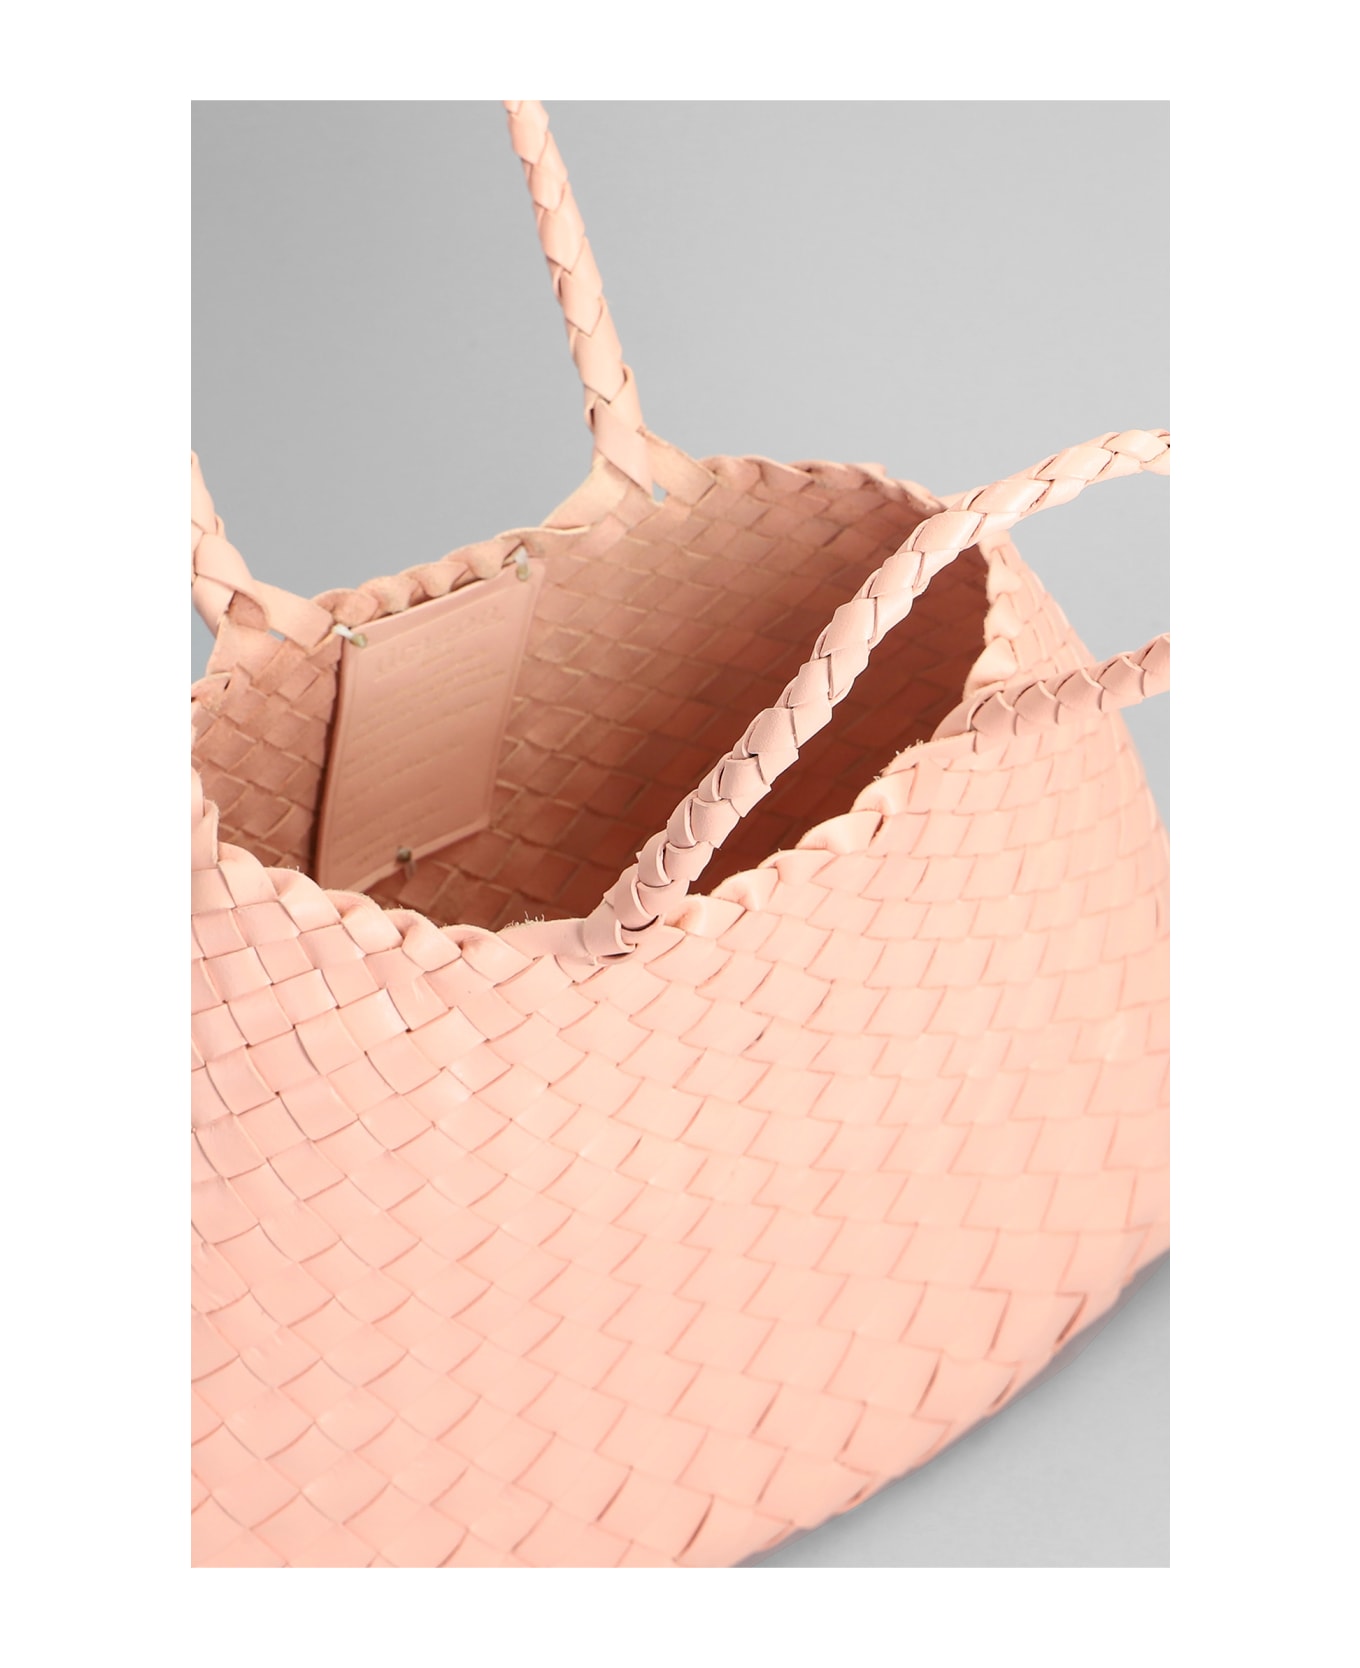 Dragon Diffusion Santa Croce Small Tote In Rose-pink Leather - rose-pink